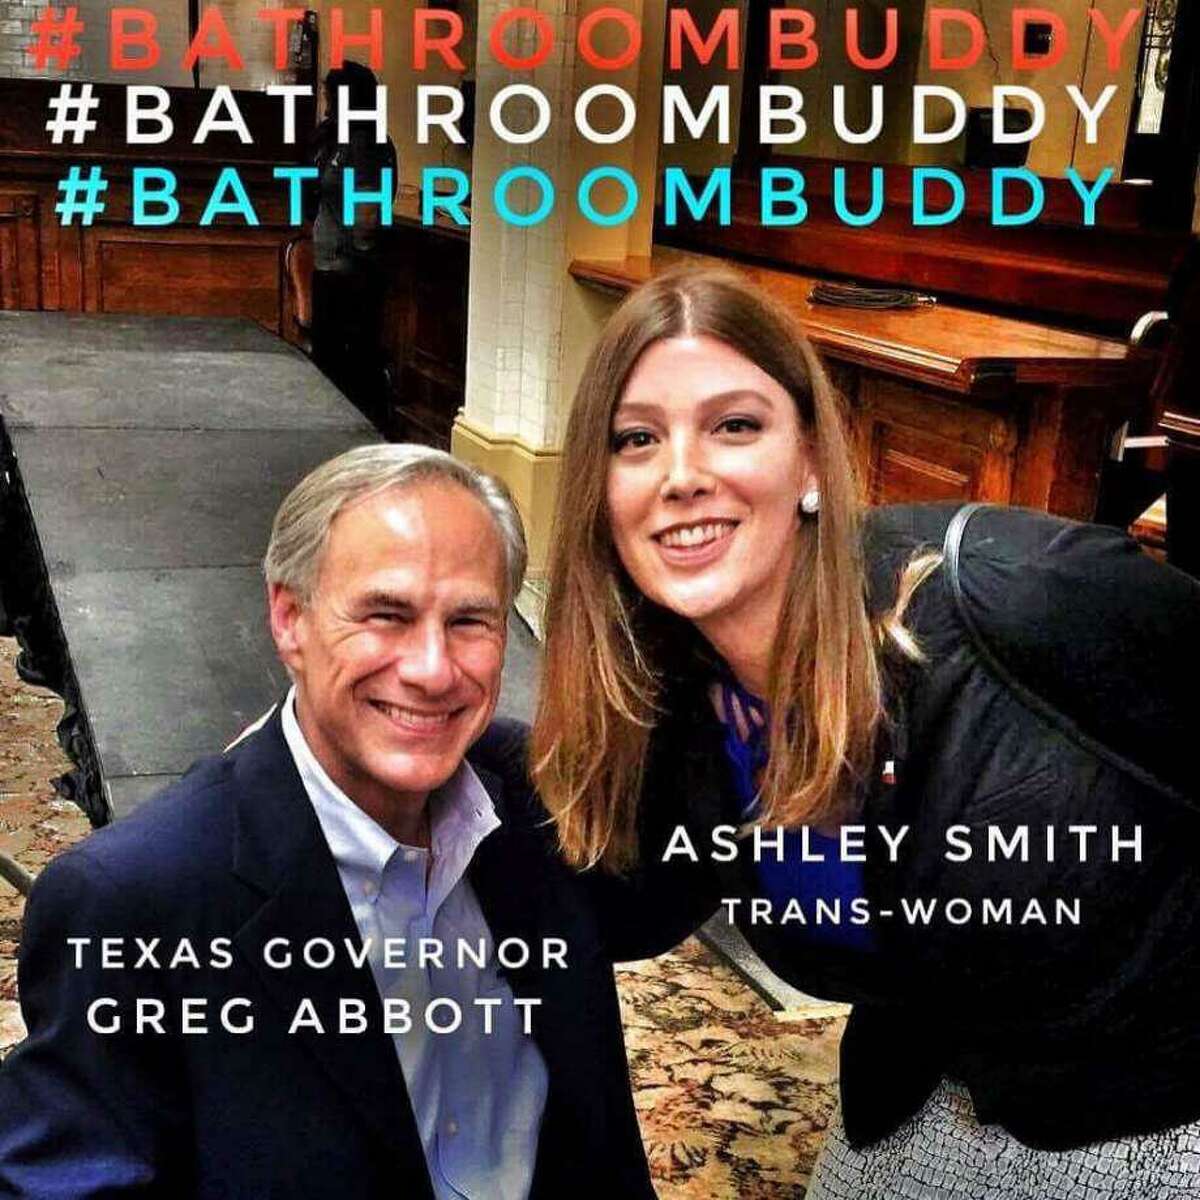 This photo of transgender activist Ashley Smith with Abbott went viral. Such activists have argued that their gender identification trumps their gender of birth, but some say that should not be so.